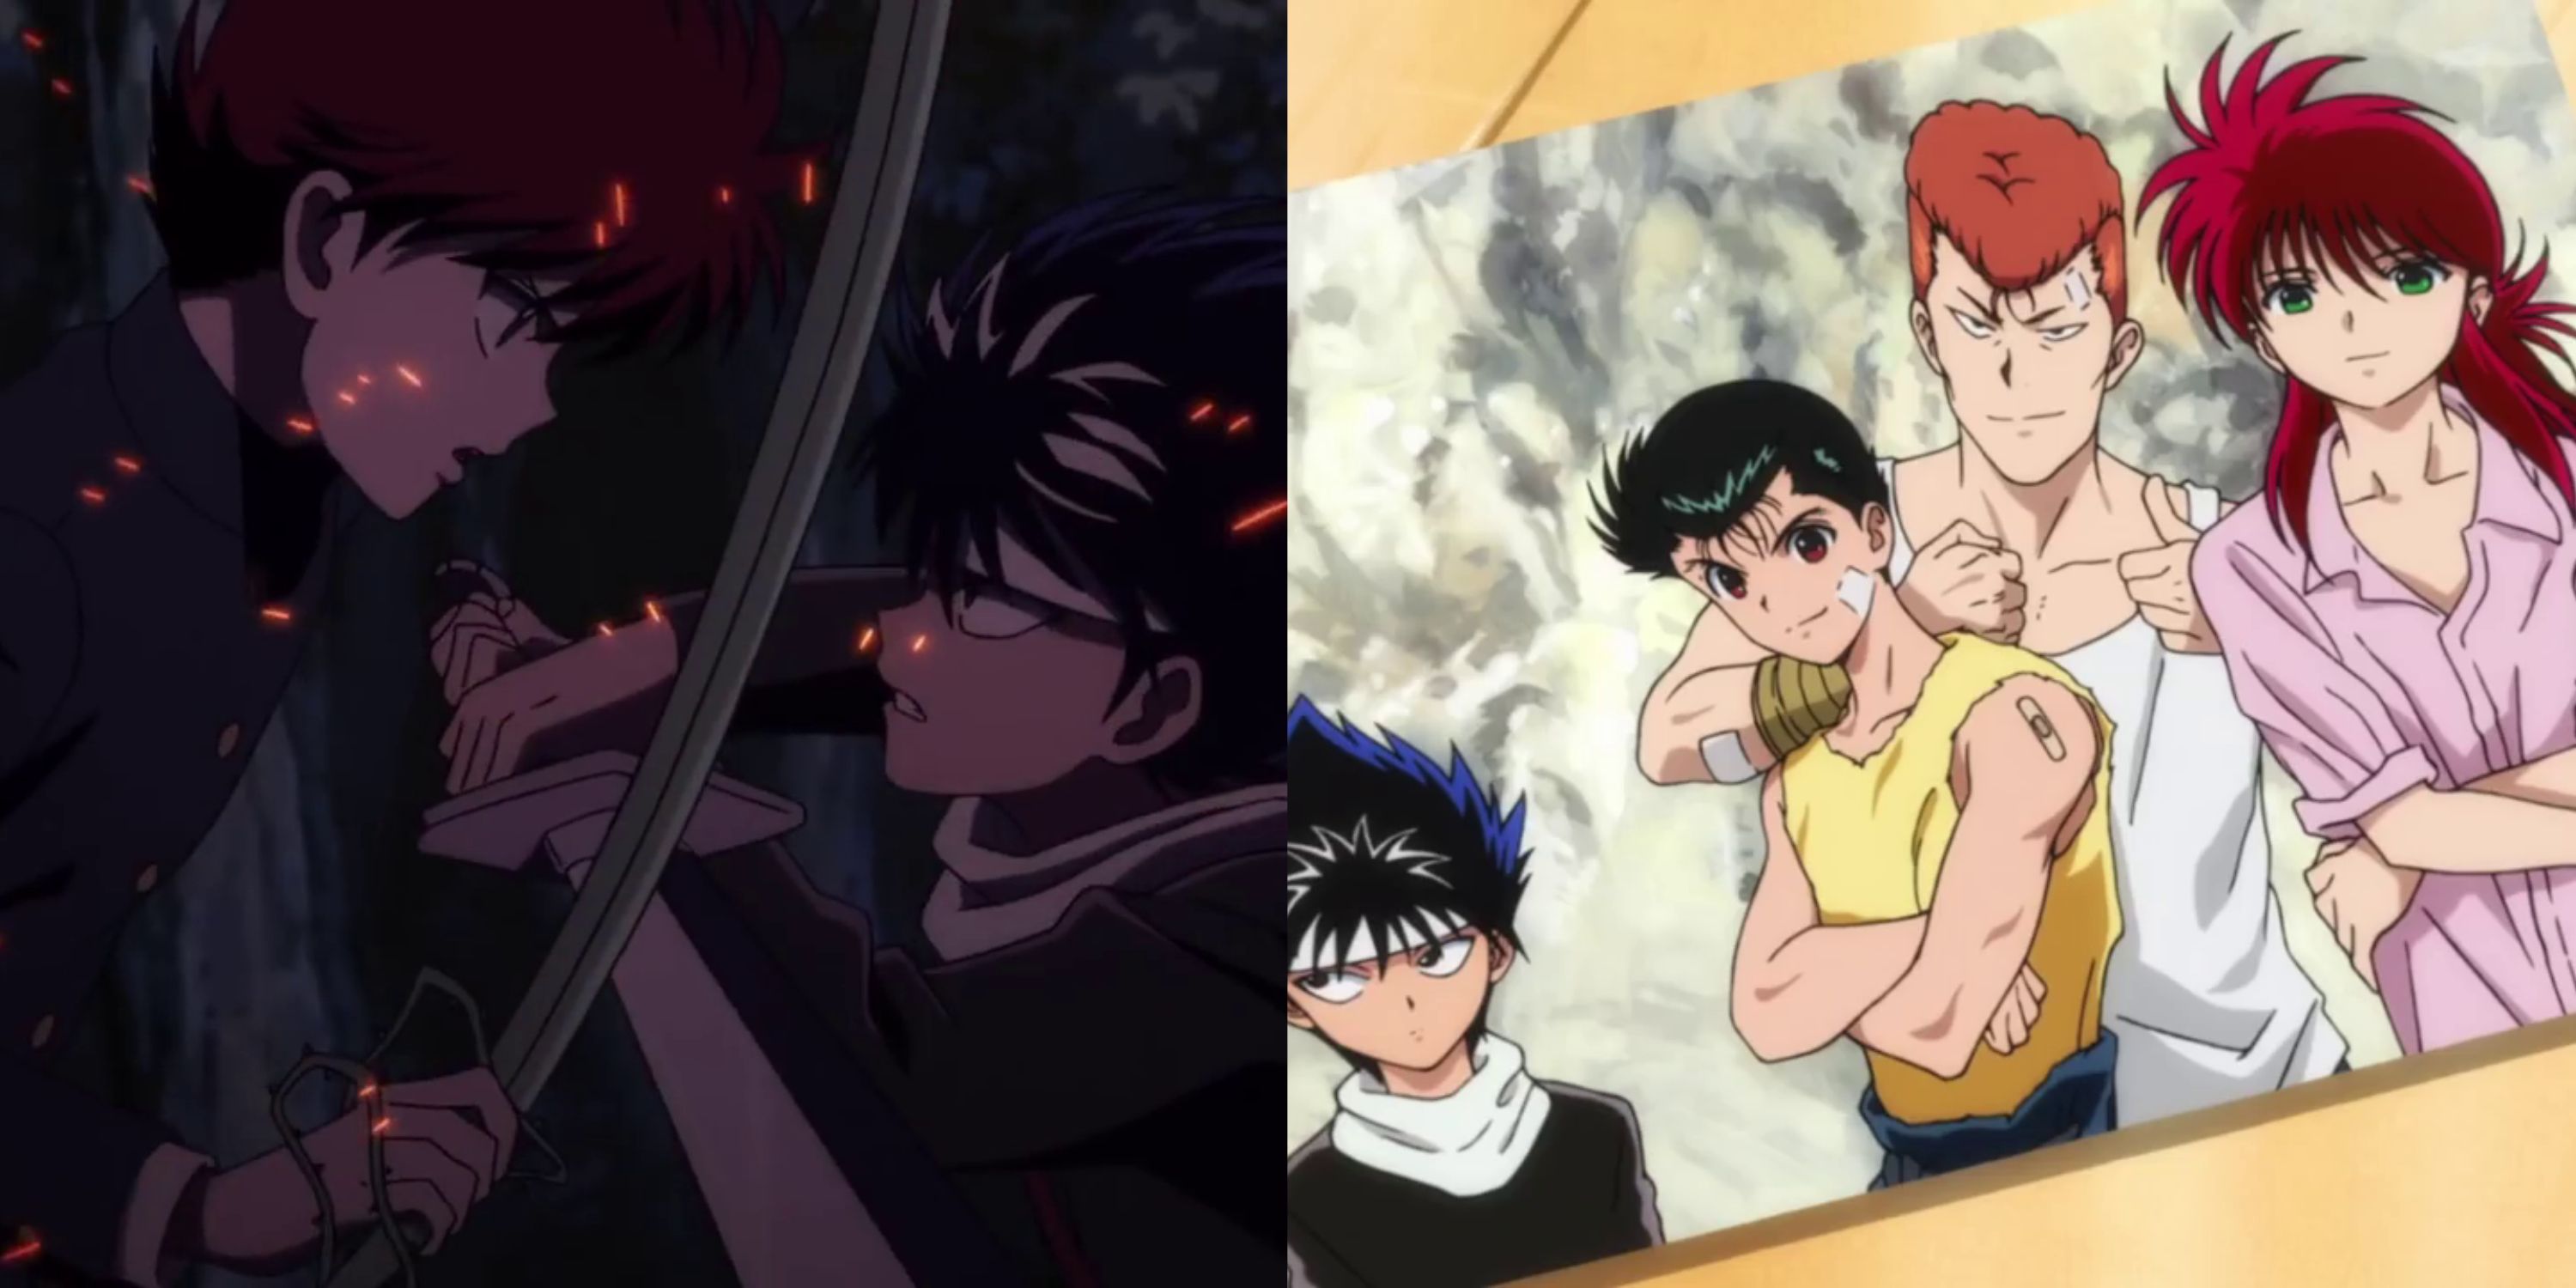 Collage of Hiei and Kurama's first meeting and a picture of team Urameshi